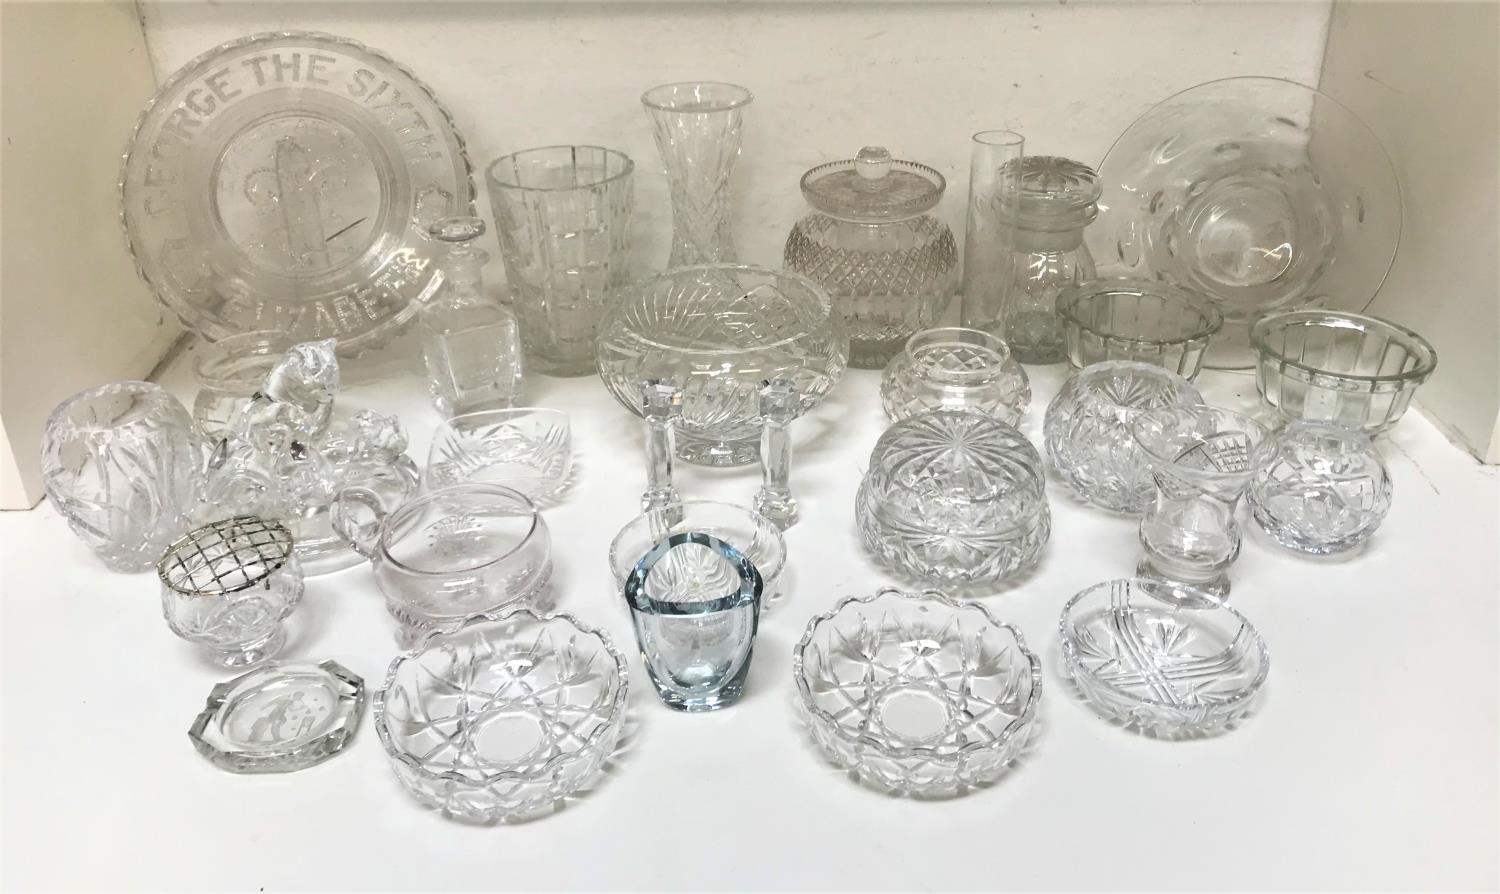 LARGE SELECTION OF CRYSTAL AND GLASSWARE including an etched glass vase, other crystal bowls and